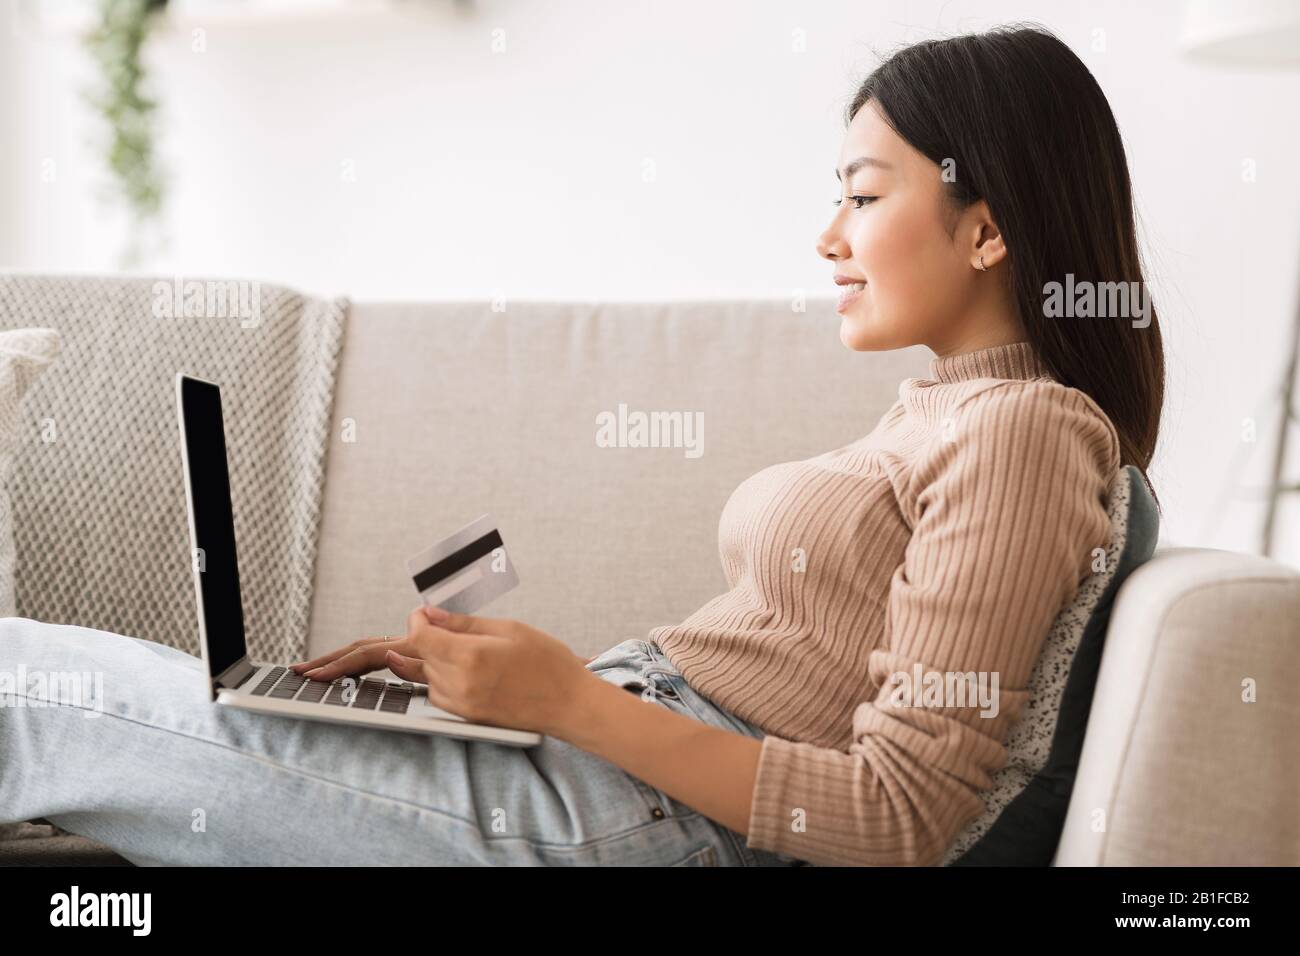 Online banking. Girl making purchases in internet Stock Photo